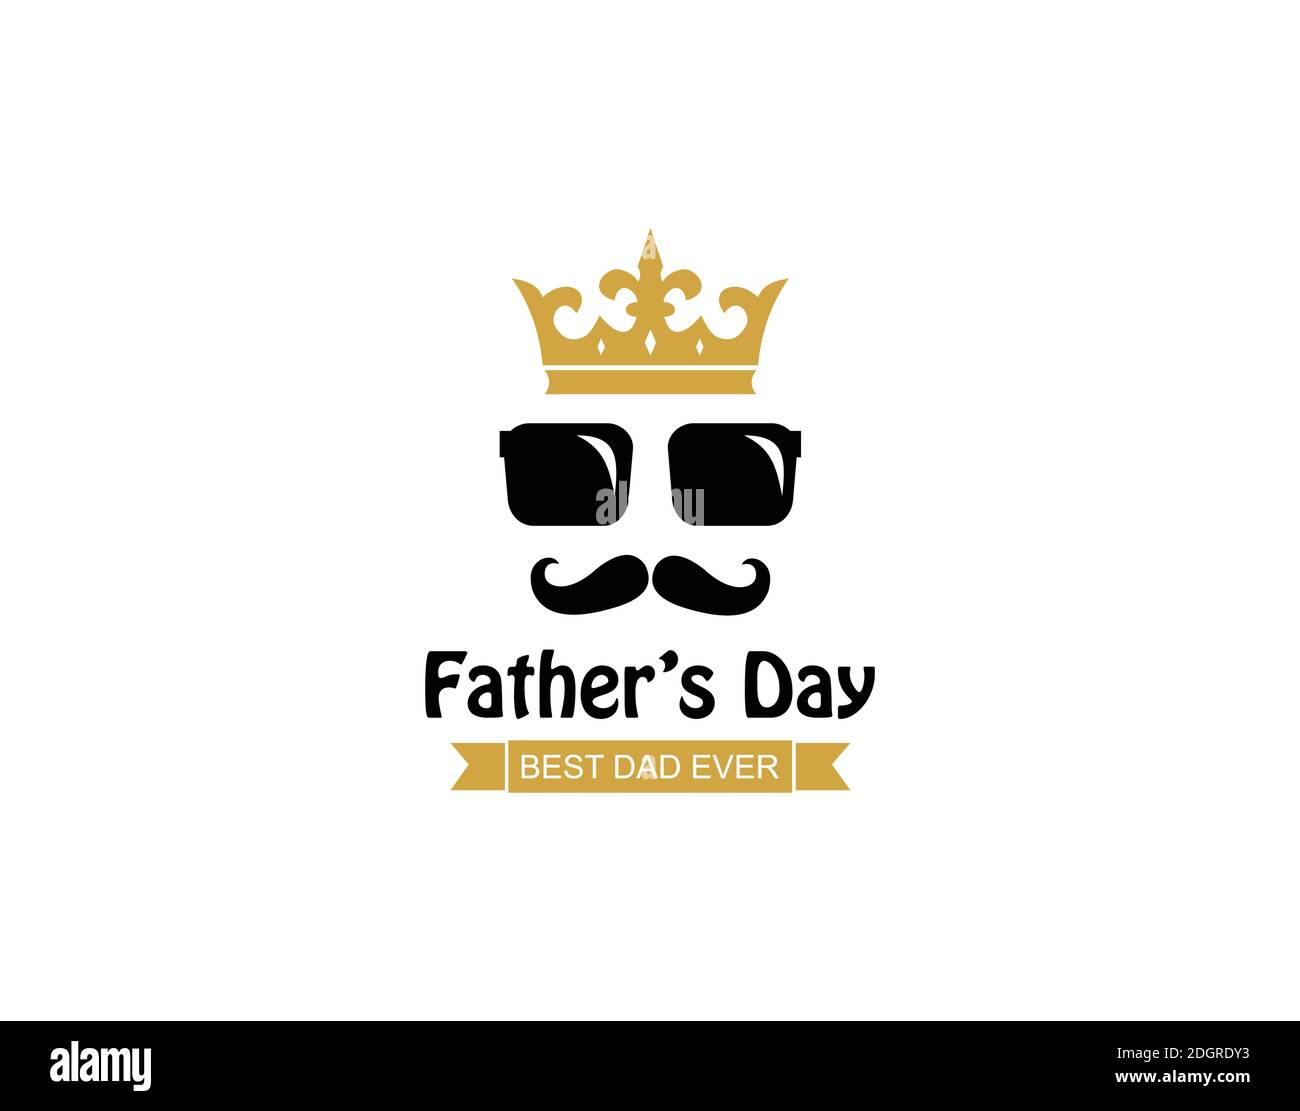 happy father's day with mustache and crown logo template inspiration Stock Vector